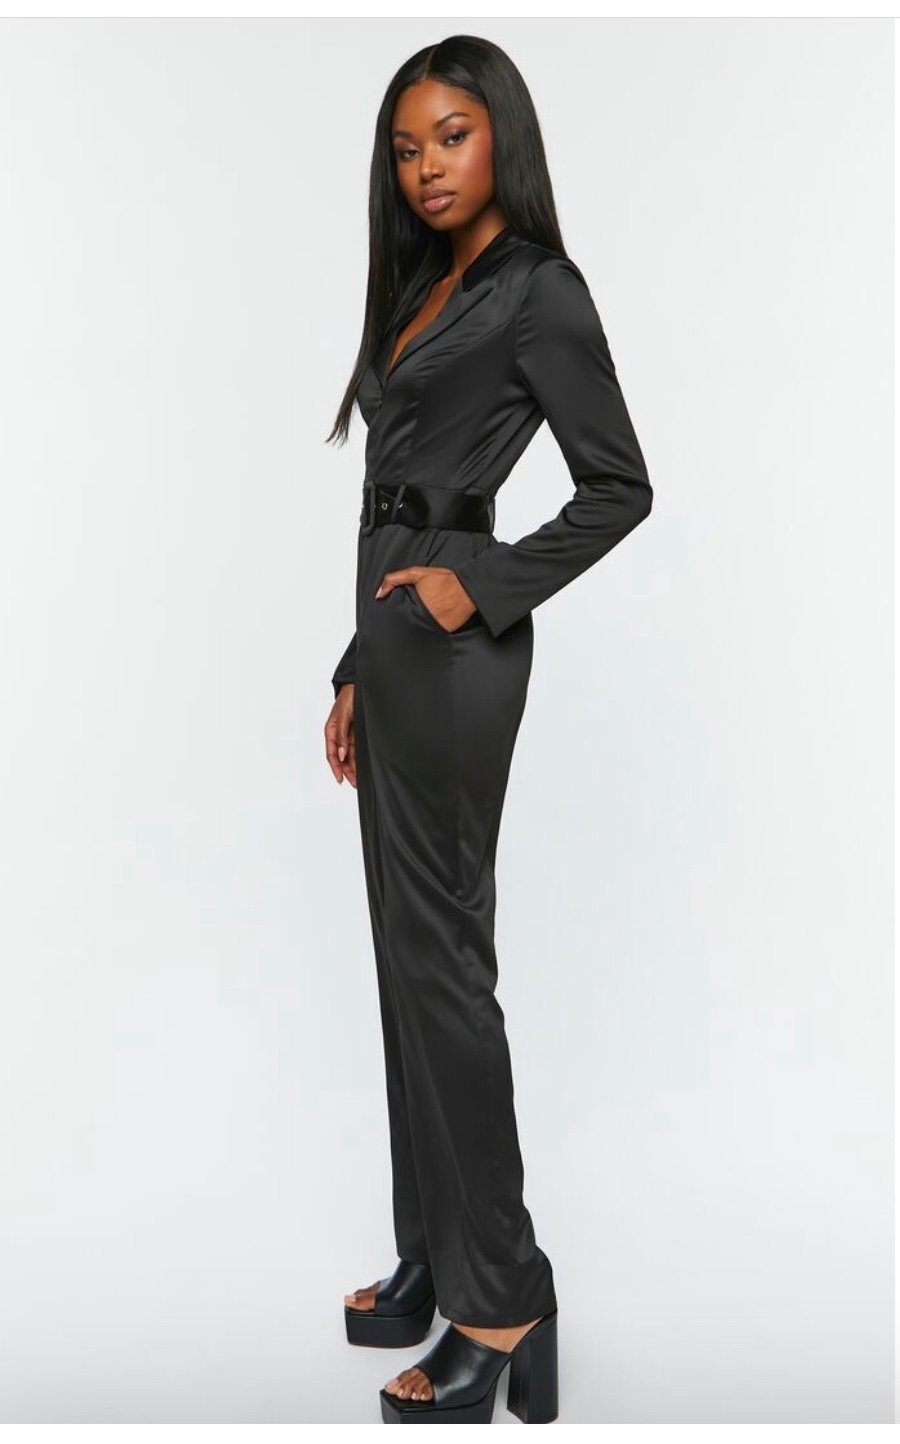 Beautiful Forever 21 Black Satin Belted Long-Sleeve Jumpsuit lYkKXrZ5a Online Shop